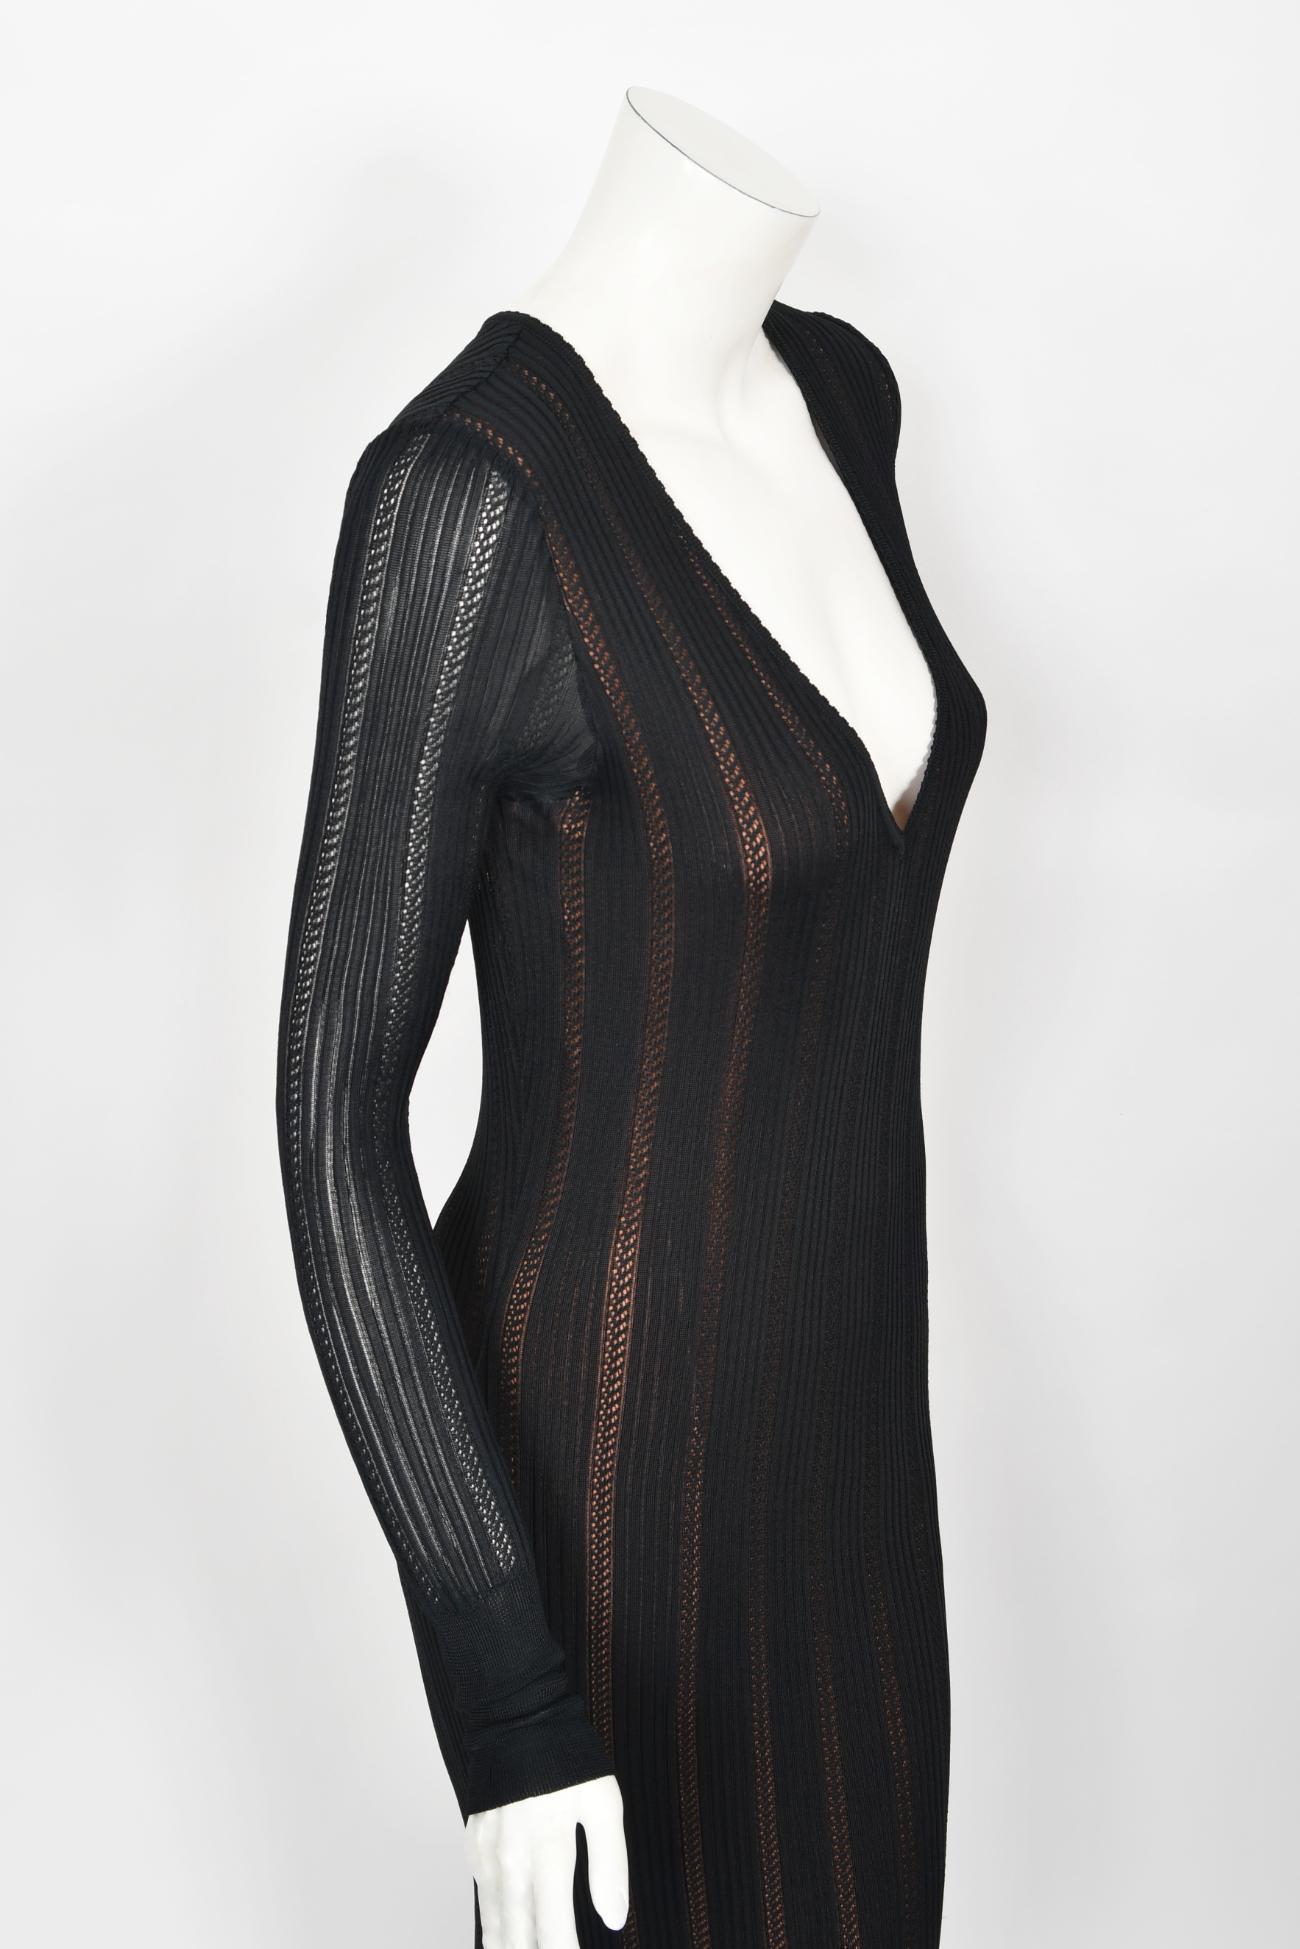 1996 Azzedine Alaia Documented Rare Nude Illusion Knit Bodycon Floor Length Gown For Sale 5